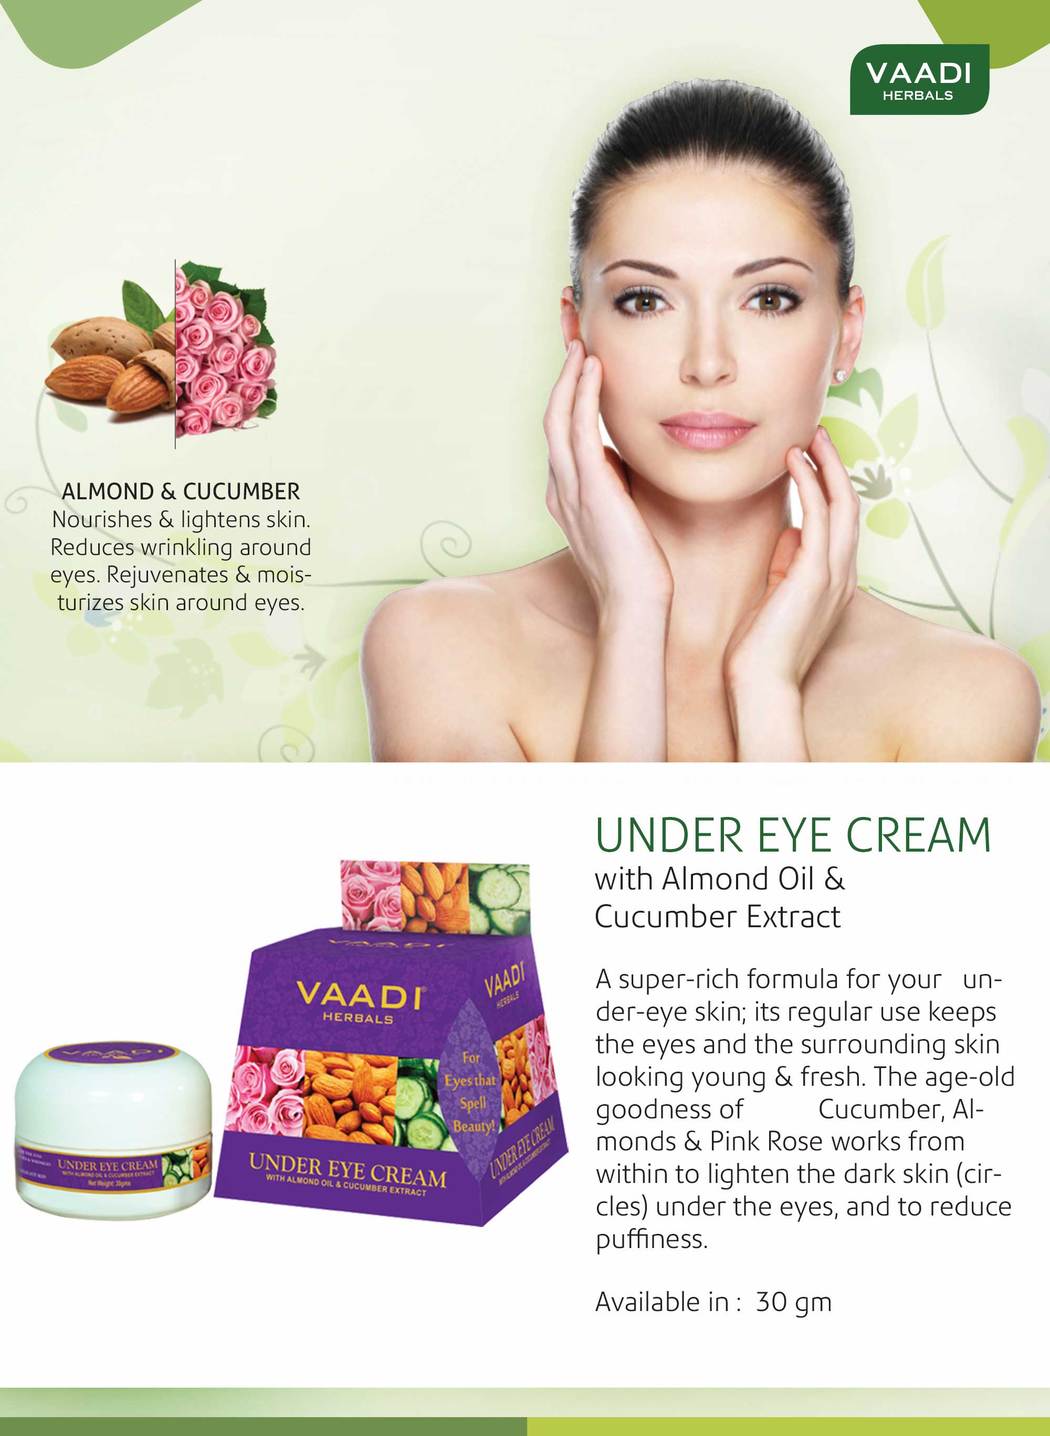 Organic Under Eye Cream with Almond Oil & Cucumber Extract - Reduces Puffiness - Keeps Skin Youthful (30 gms /1.1 oz)